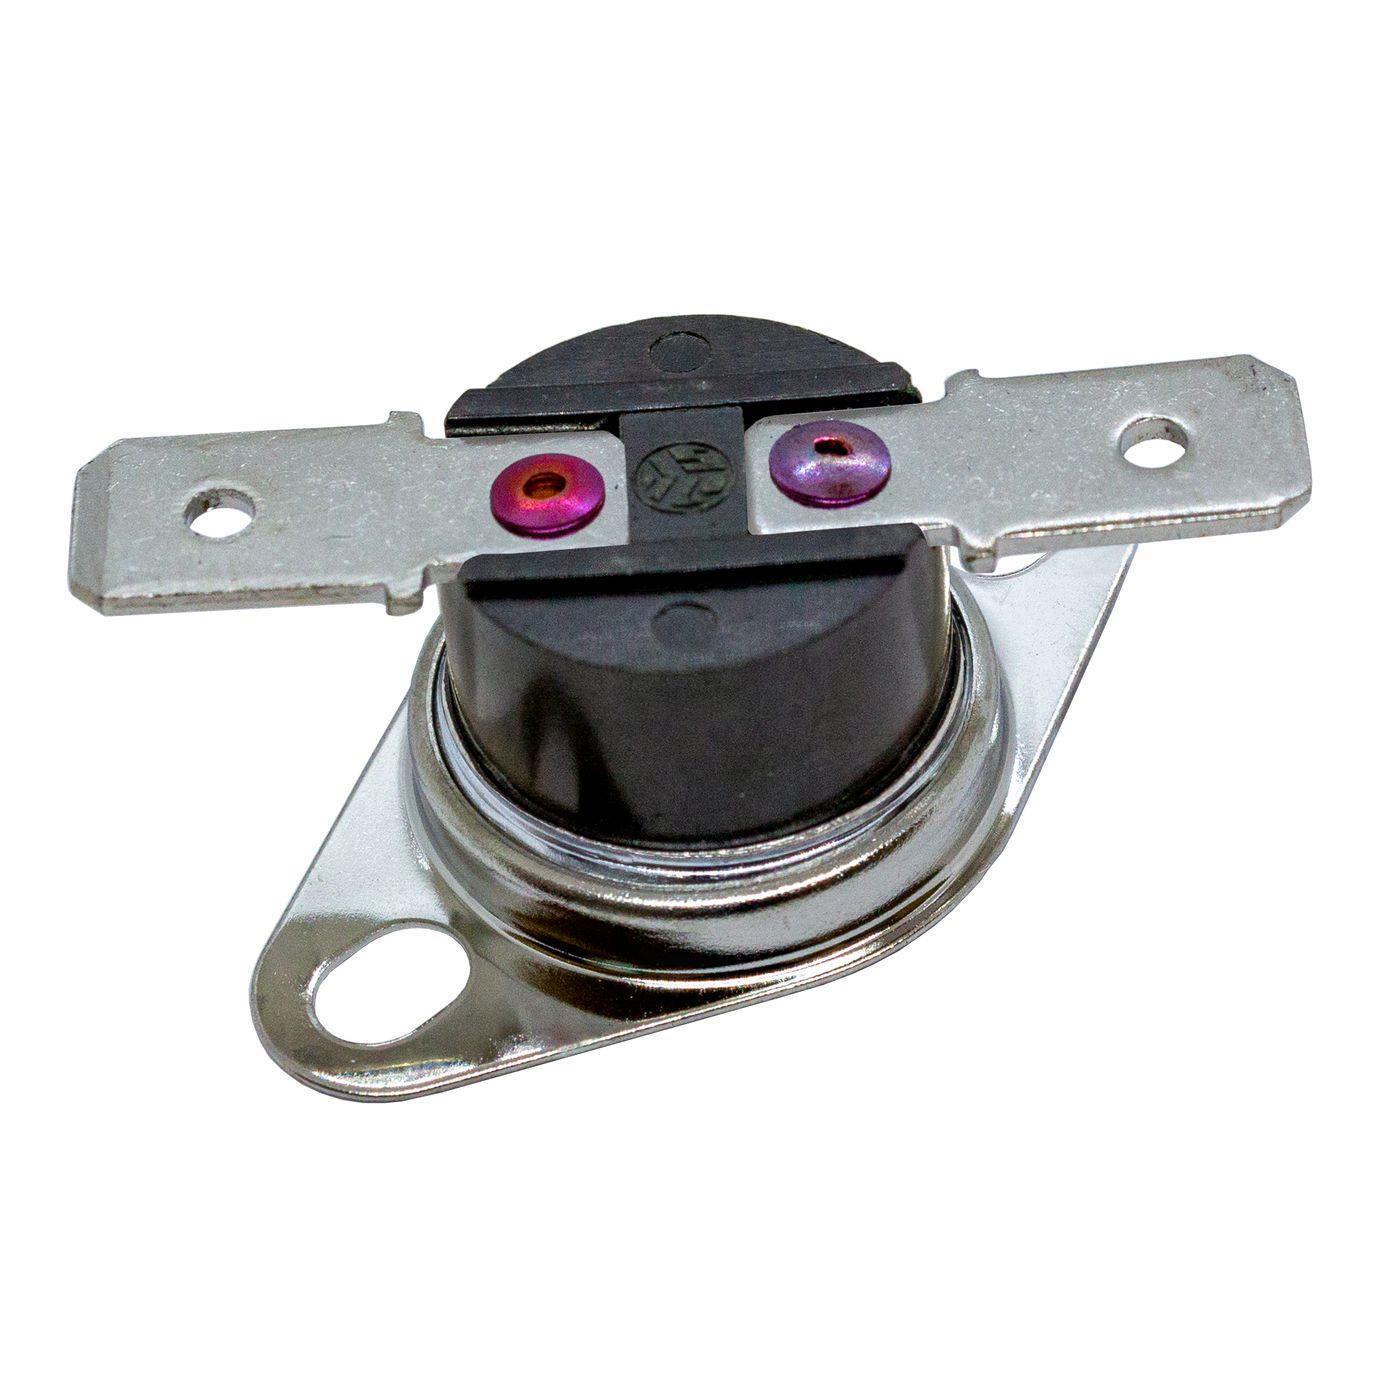 Thermal switch 65°C NC contact 250V 10A Temperature switch thermostat KSD301 Bimetal Thermal protection